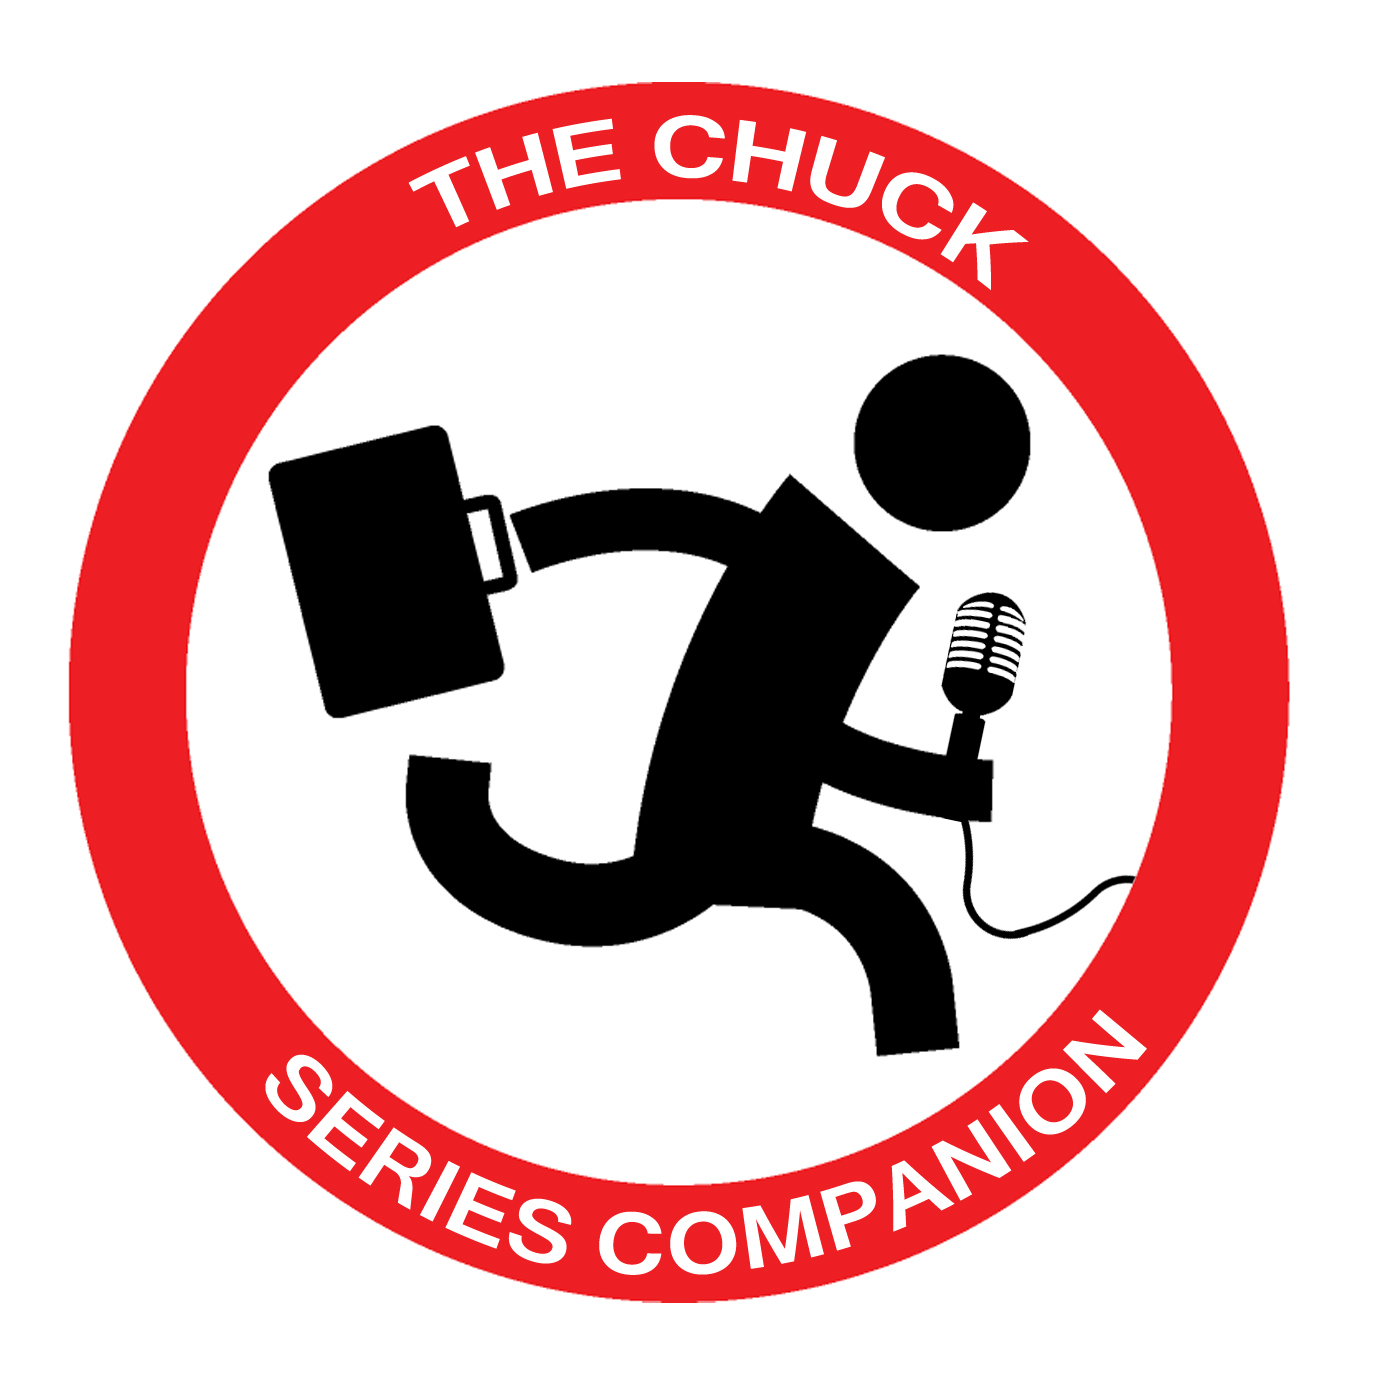 The Chuck Series Companion -- S3Ep4 Vs Operation Awesome